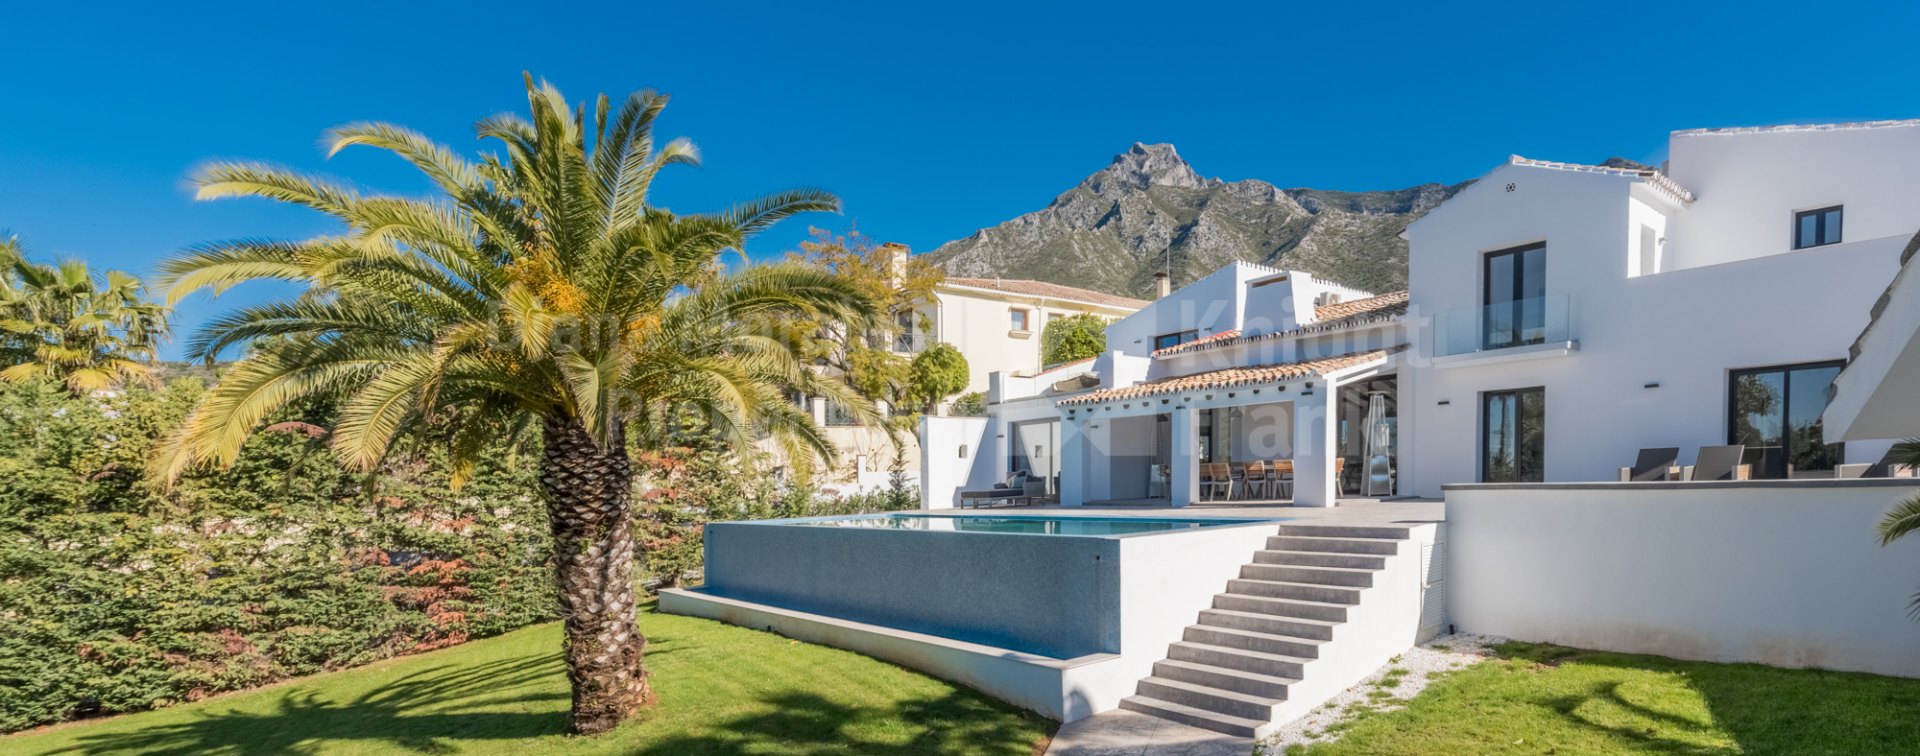 Marbella Hill Club, Completely refurbished villa in gated community